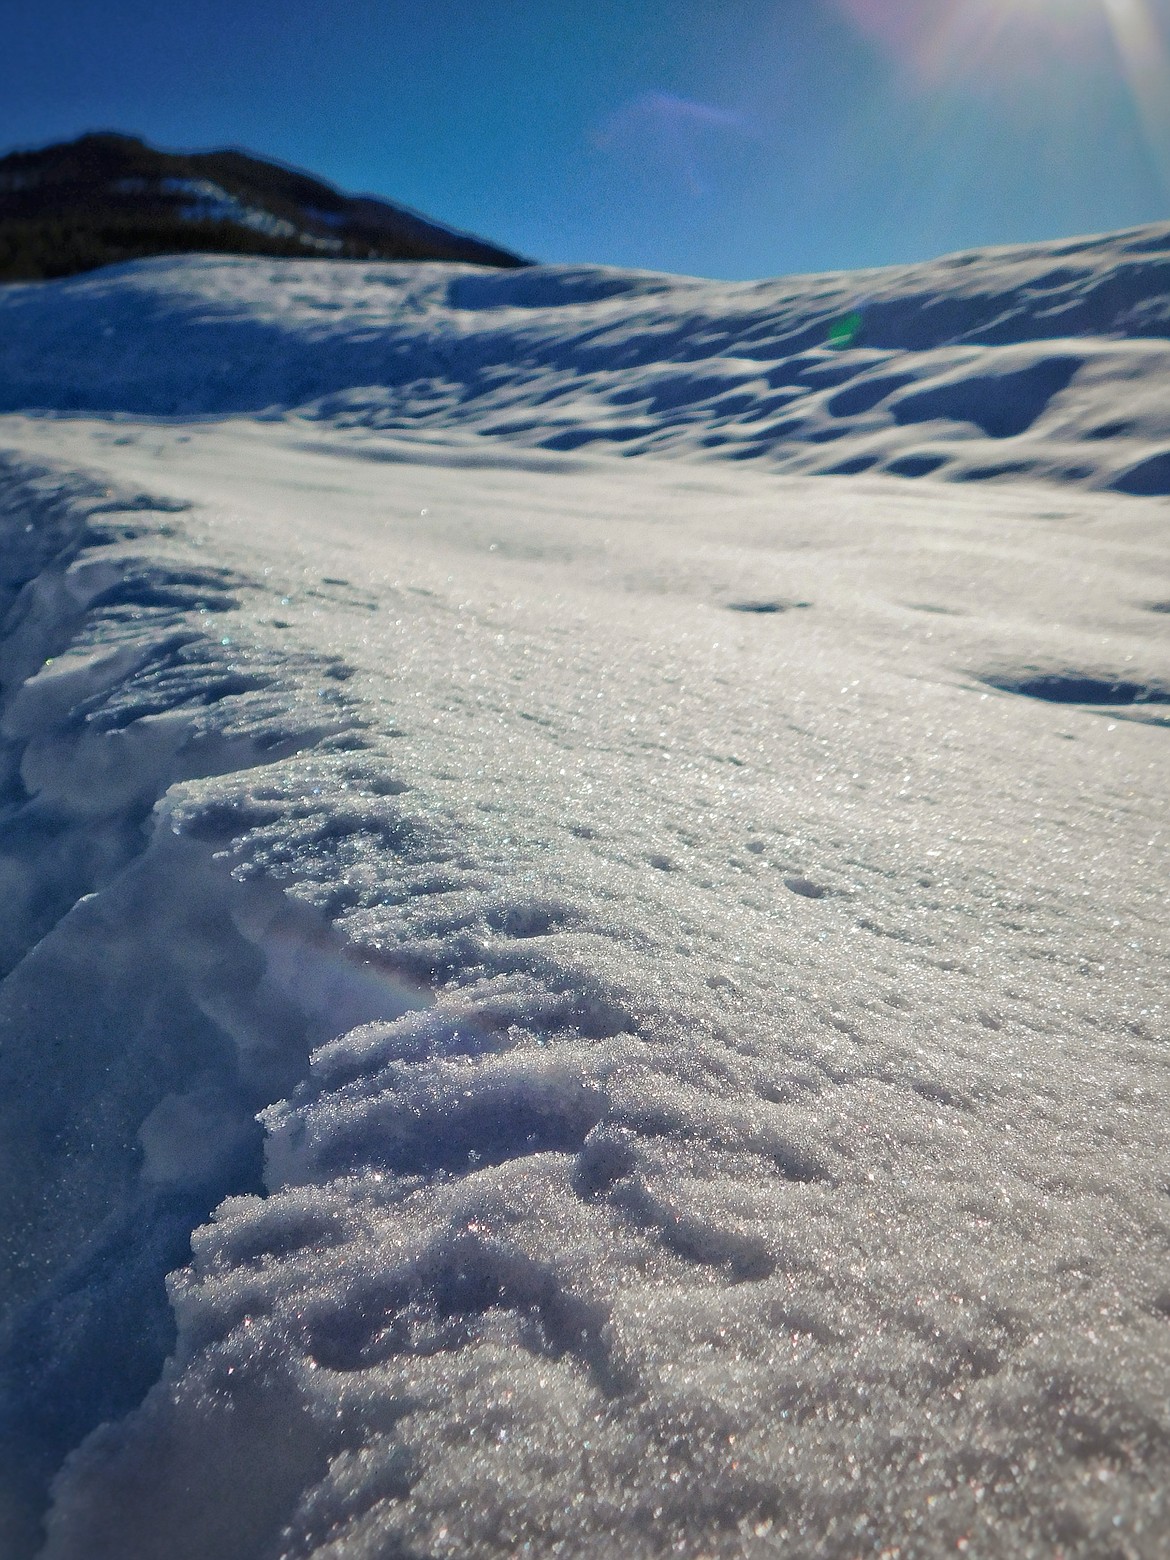 Remember that shimmery crystallized snow is pretty, but makes an unstable base for new snow and helps to create avalanche conditions. This photo was taken the day before our last snowstorm which provided lots of heavy snow.